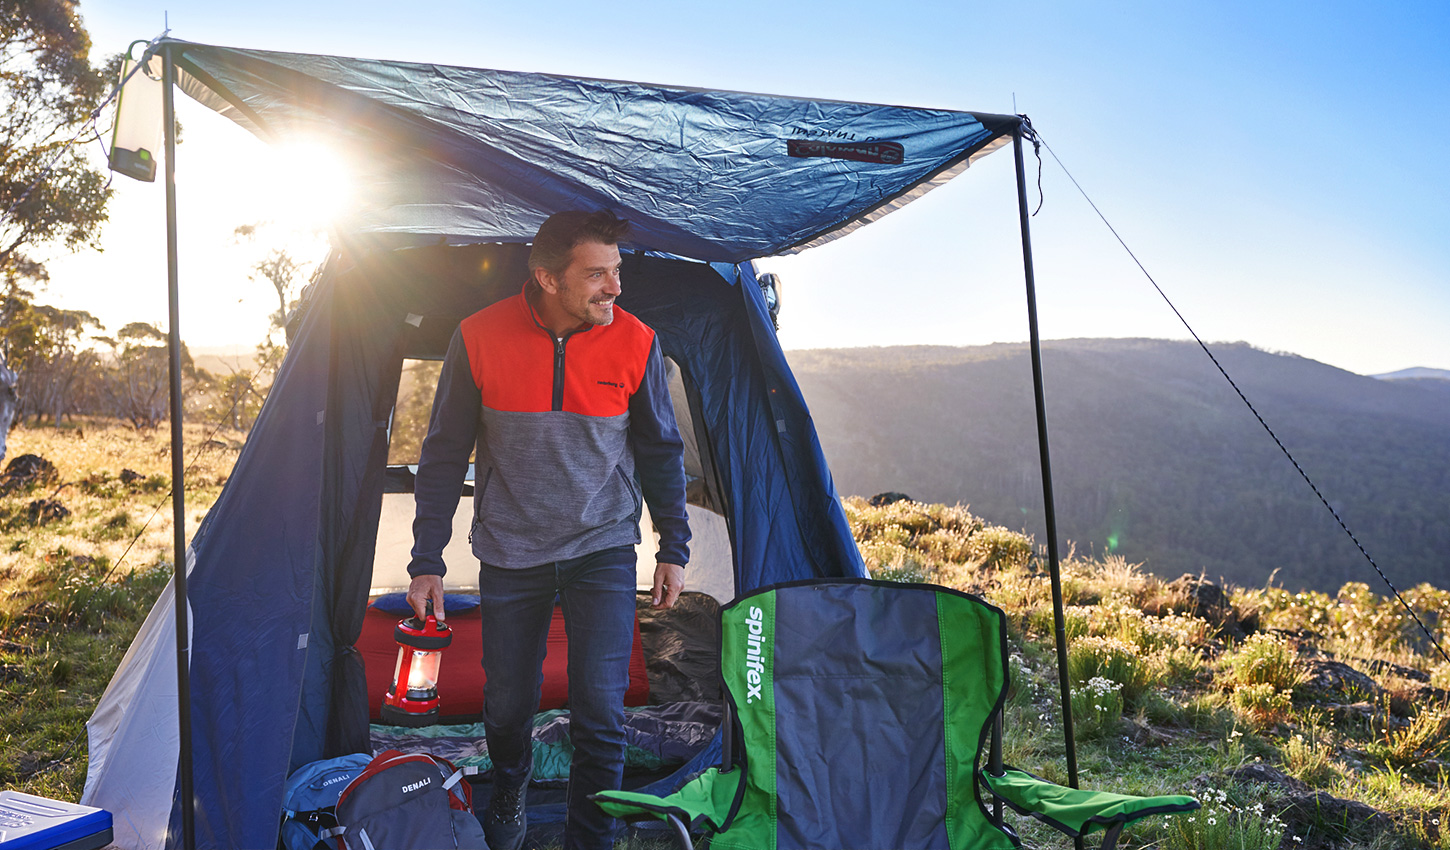 How To Maintain And Care For Hiking And Camping Gear